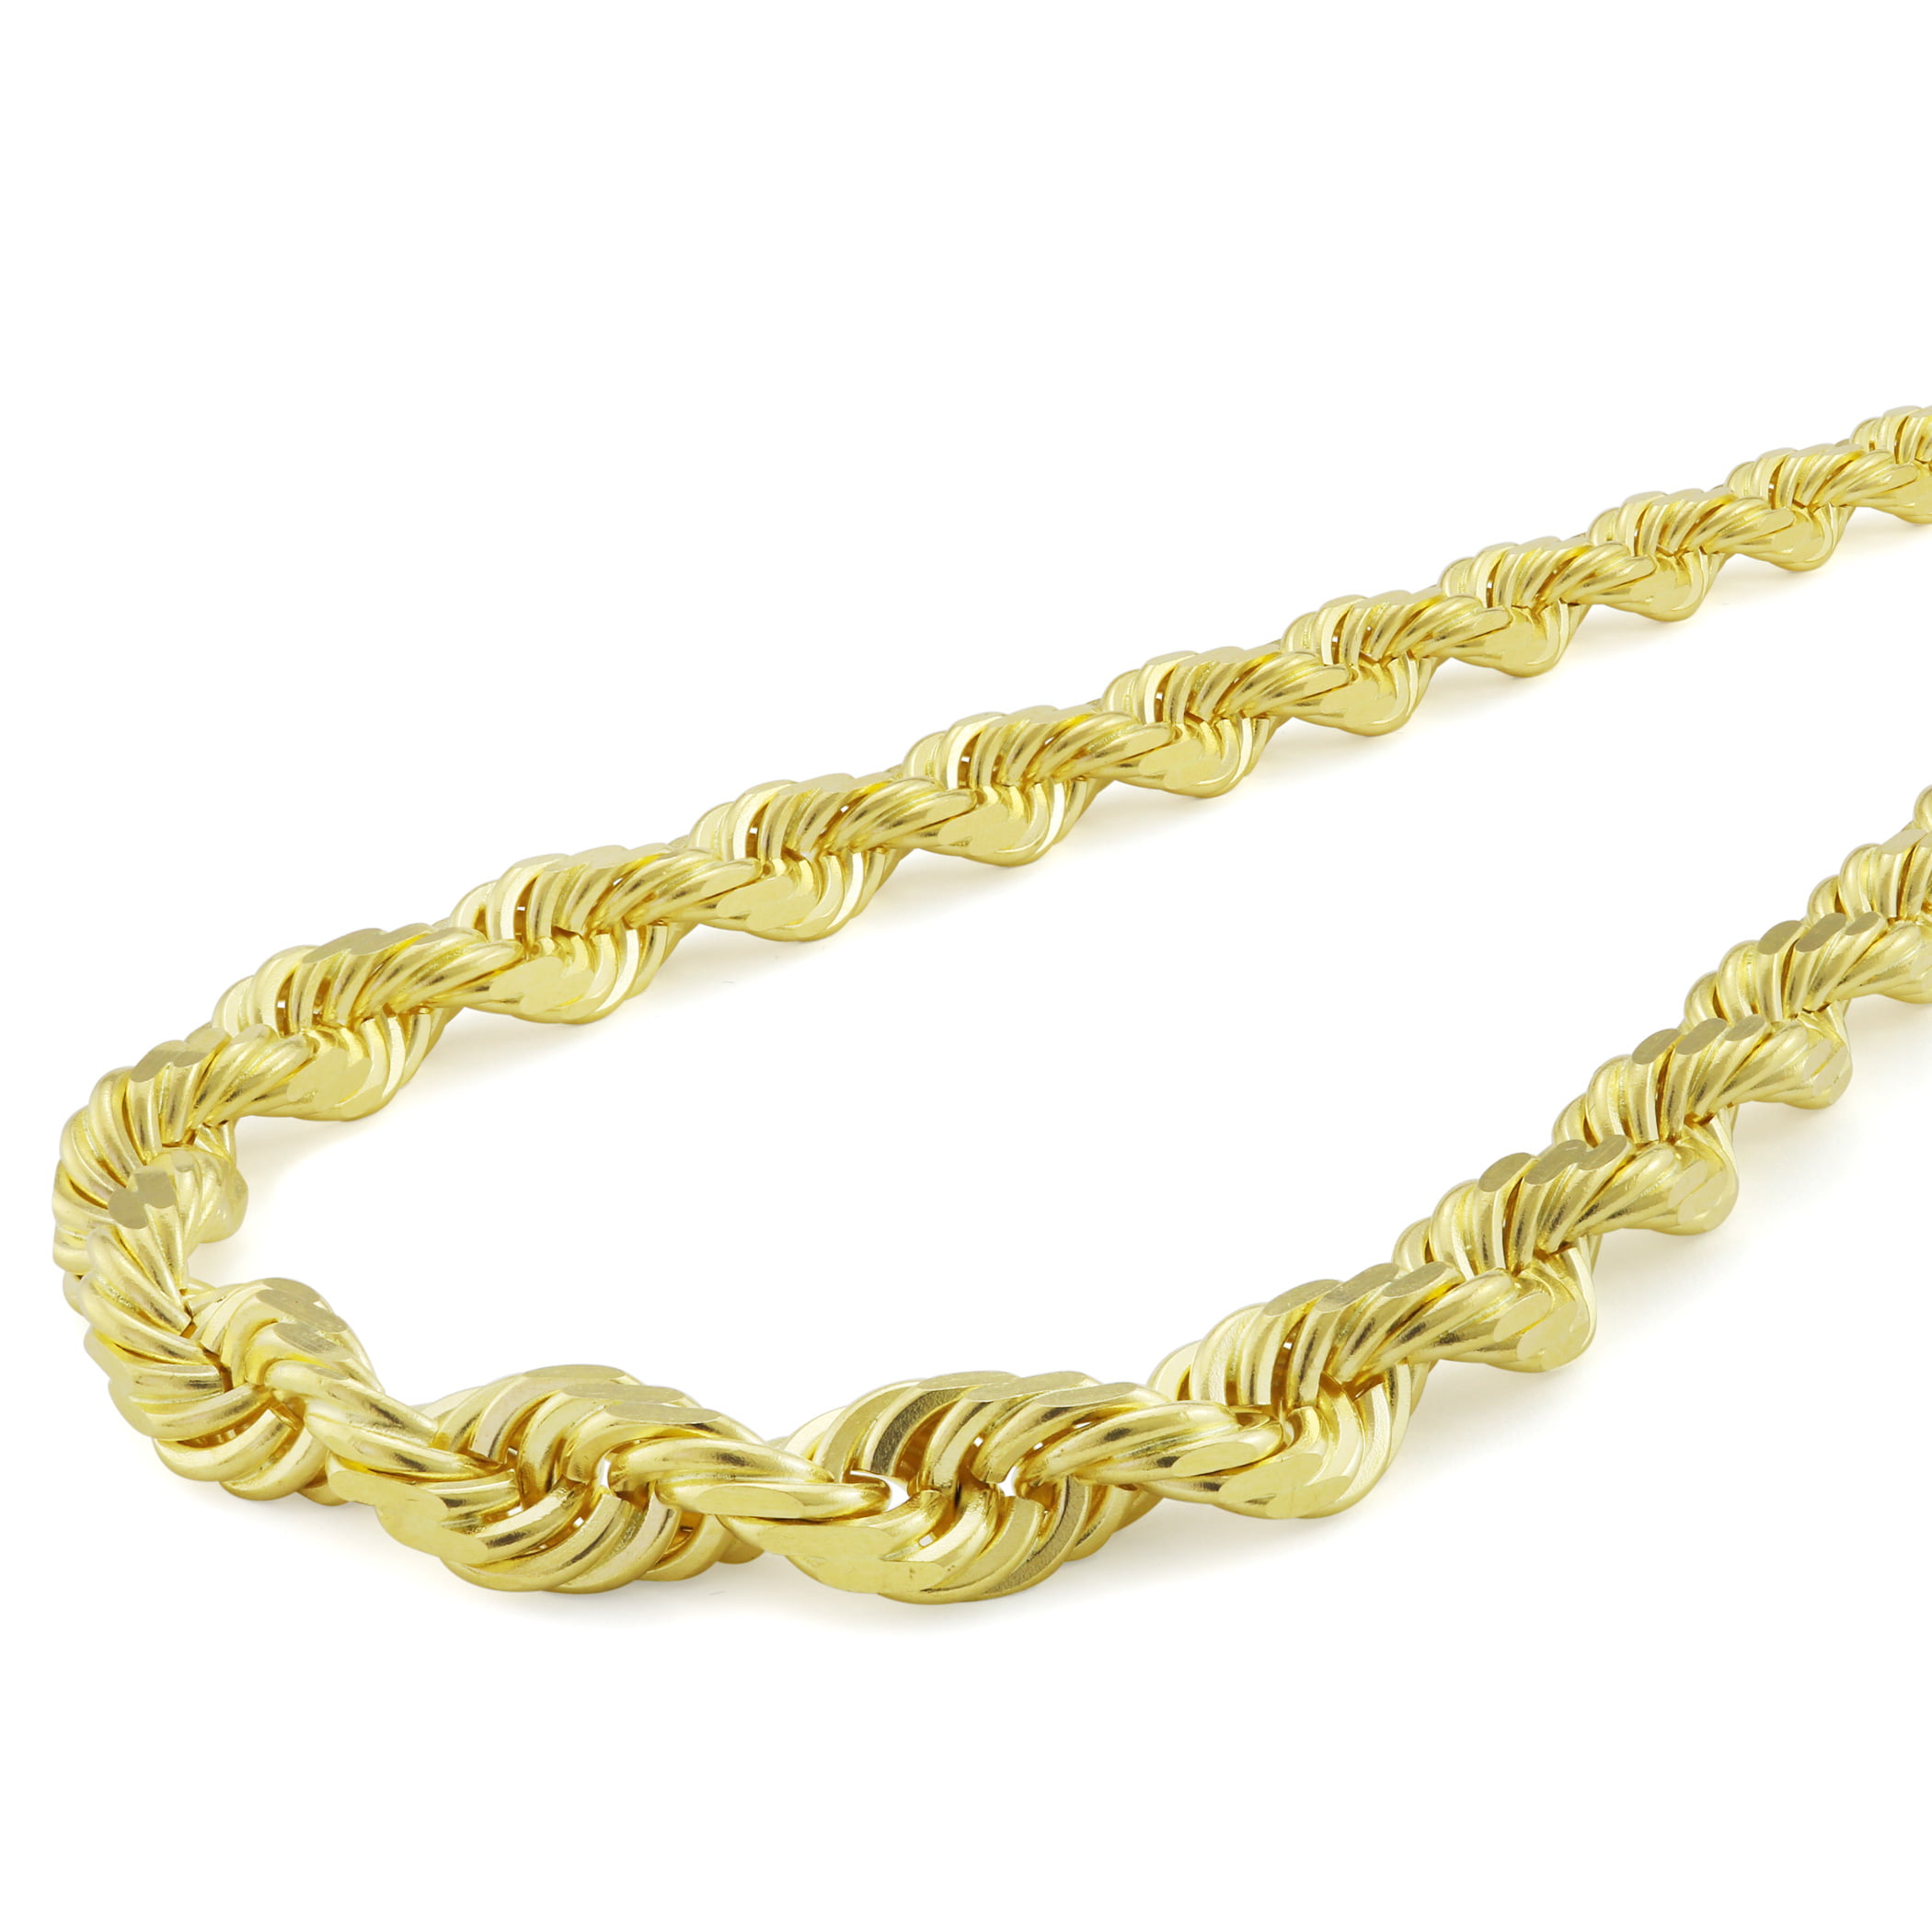 10k Gold Rope Bracelet, 7mm Link Twisted Rope Bracelet, Thick Twisted Chain  Bracelet, Genuine Gold Jewelry Supply, Gold Jewelry Unisex Gift - Etsy